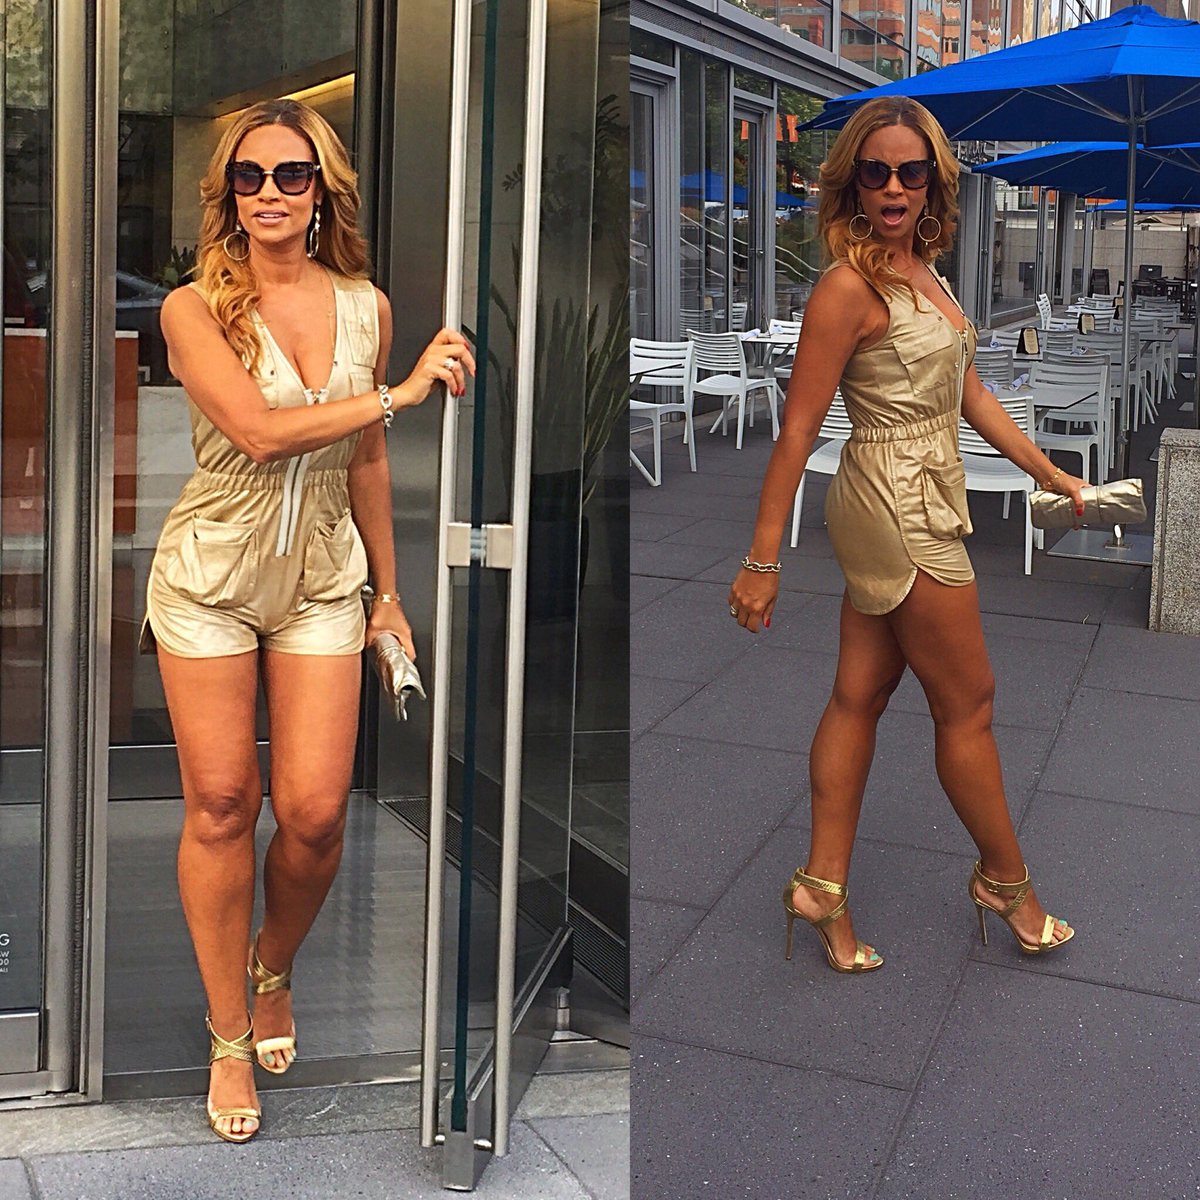 Gizelle Bryant on Twitter: "#LegsForDays #GotItFromMyMomma #RHOP… "